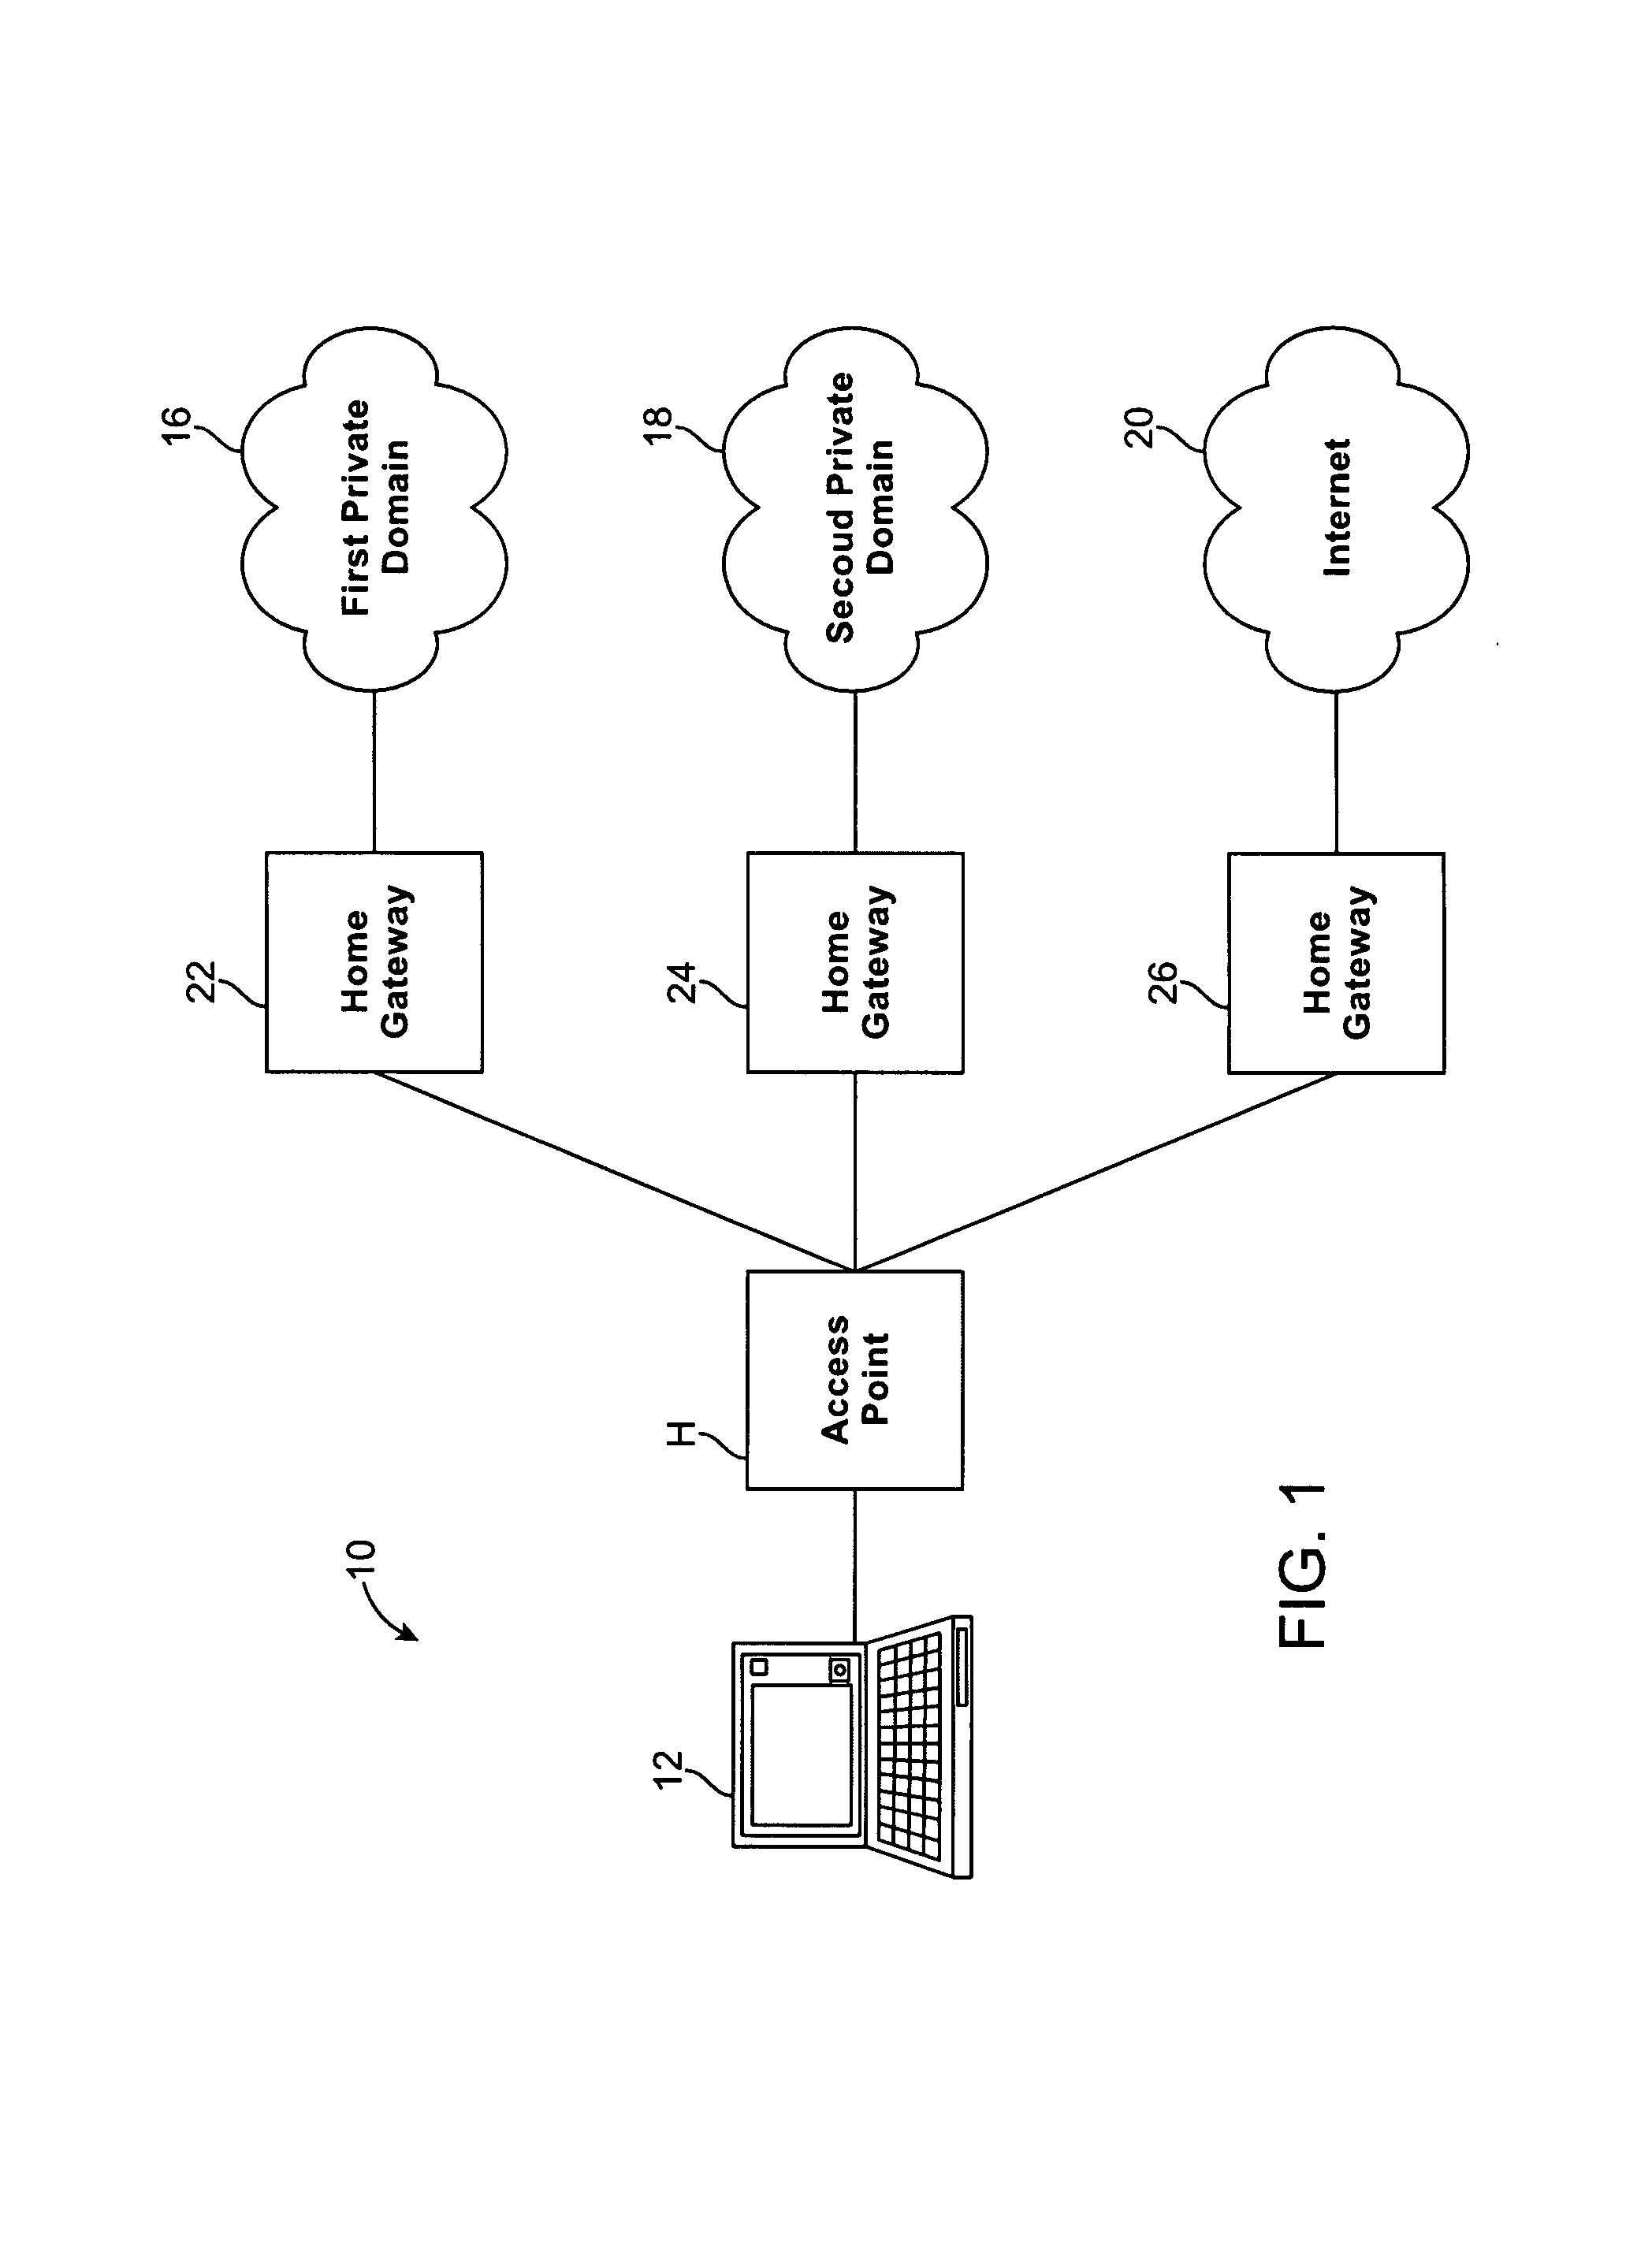 Method and system for controlling subscriber access in a network capable of establishing connections with a plurality of domain sites